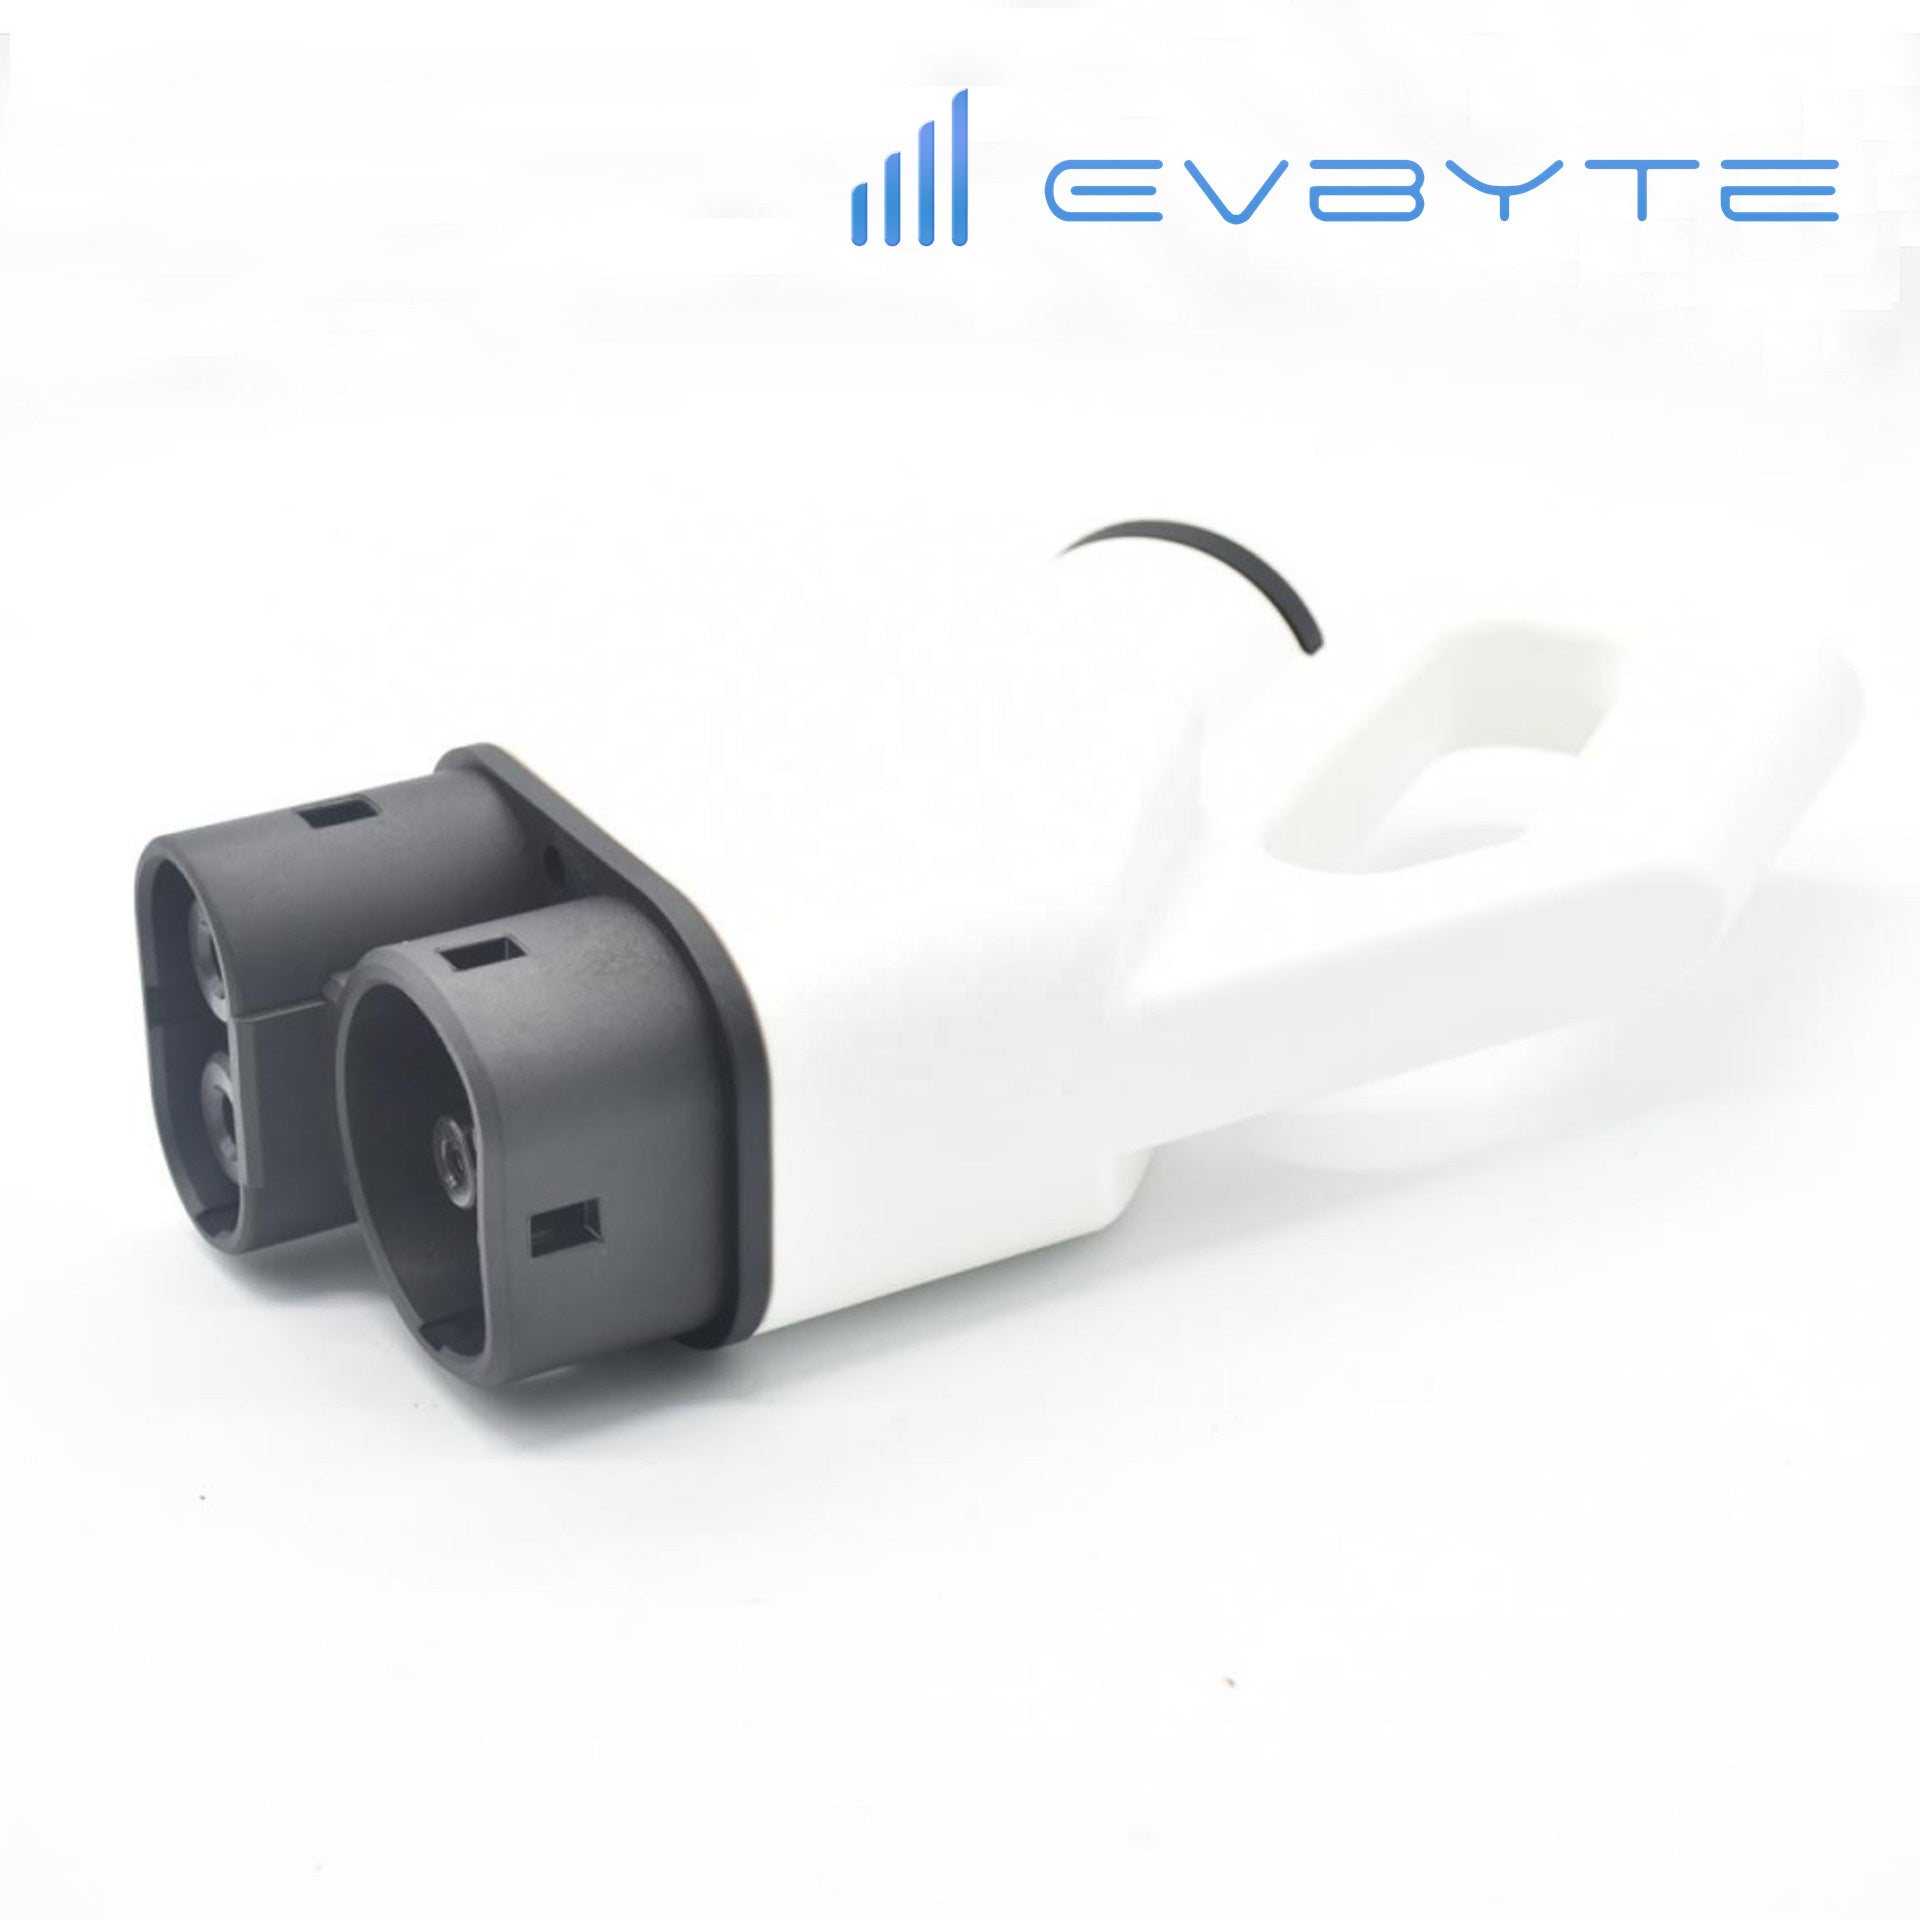 CCS 2 DC EV Charging Plug Type 2 IEC 62169 150A 200A Fast Car Ev Charger  Connector For Charging Station